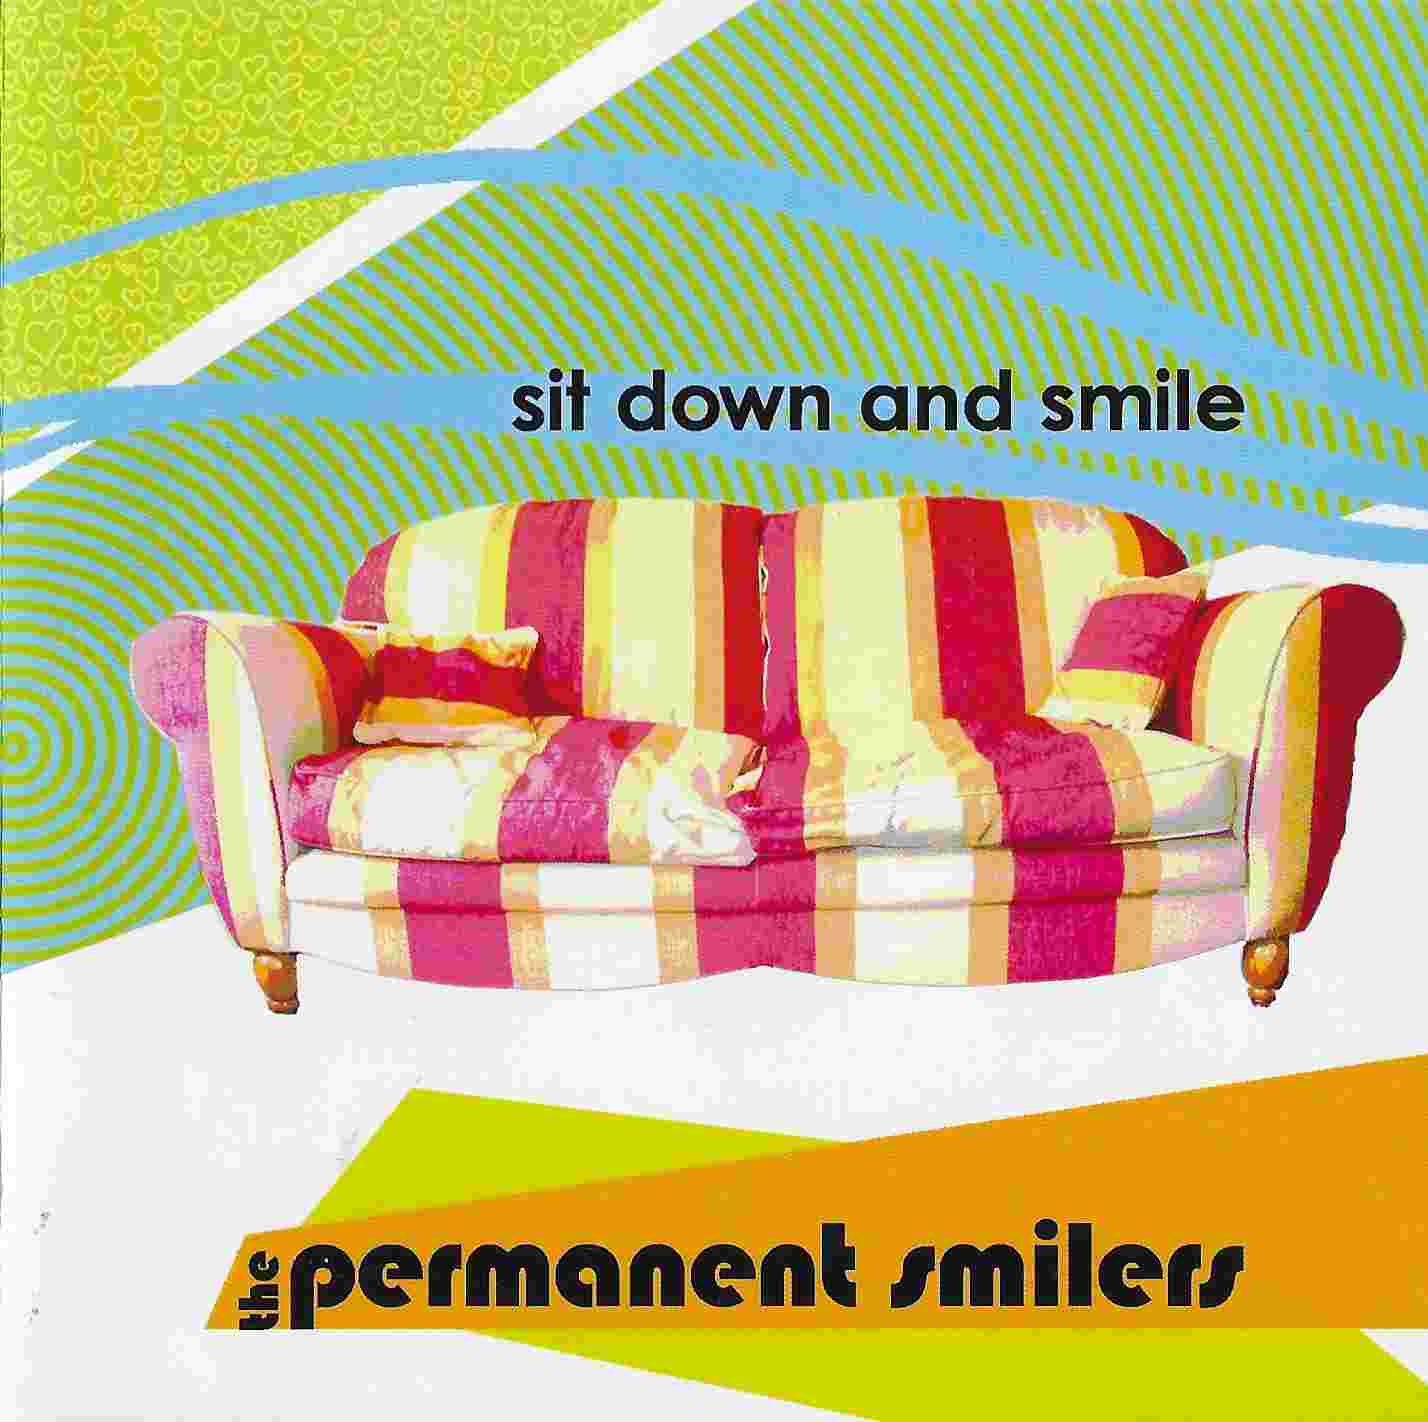 Picture of CITRIC 3 Sit down and smile by artist The Permanent Smilers from The Stranglers cds